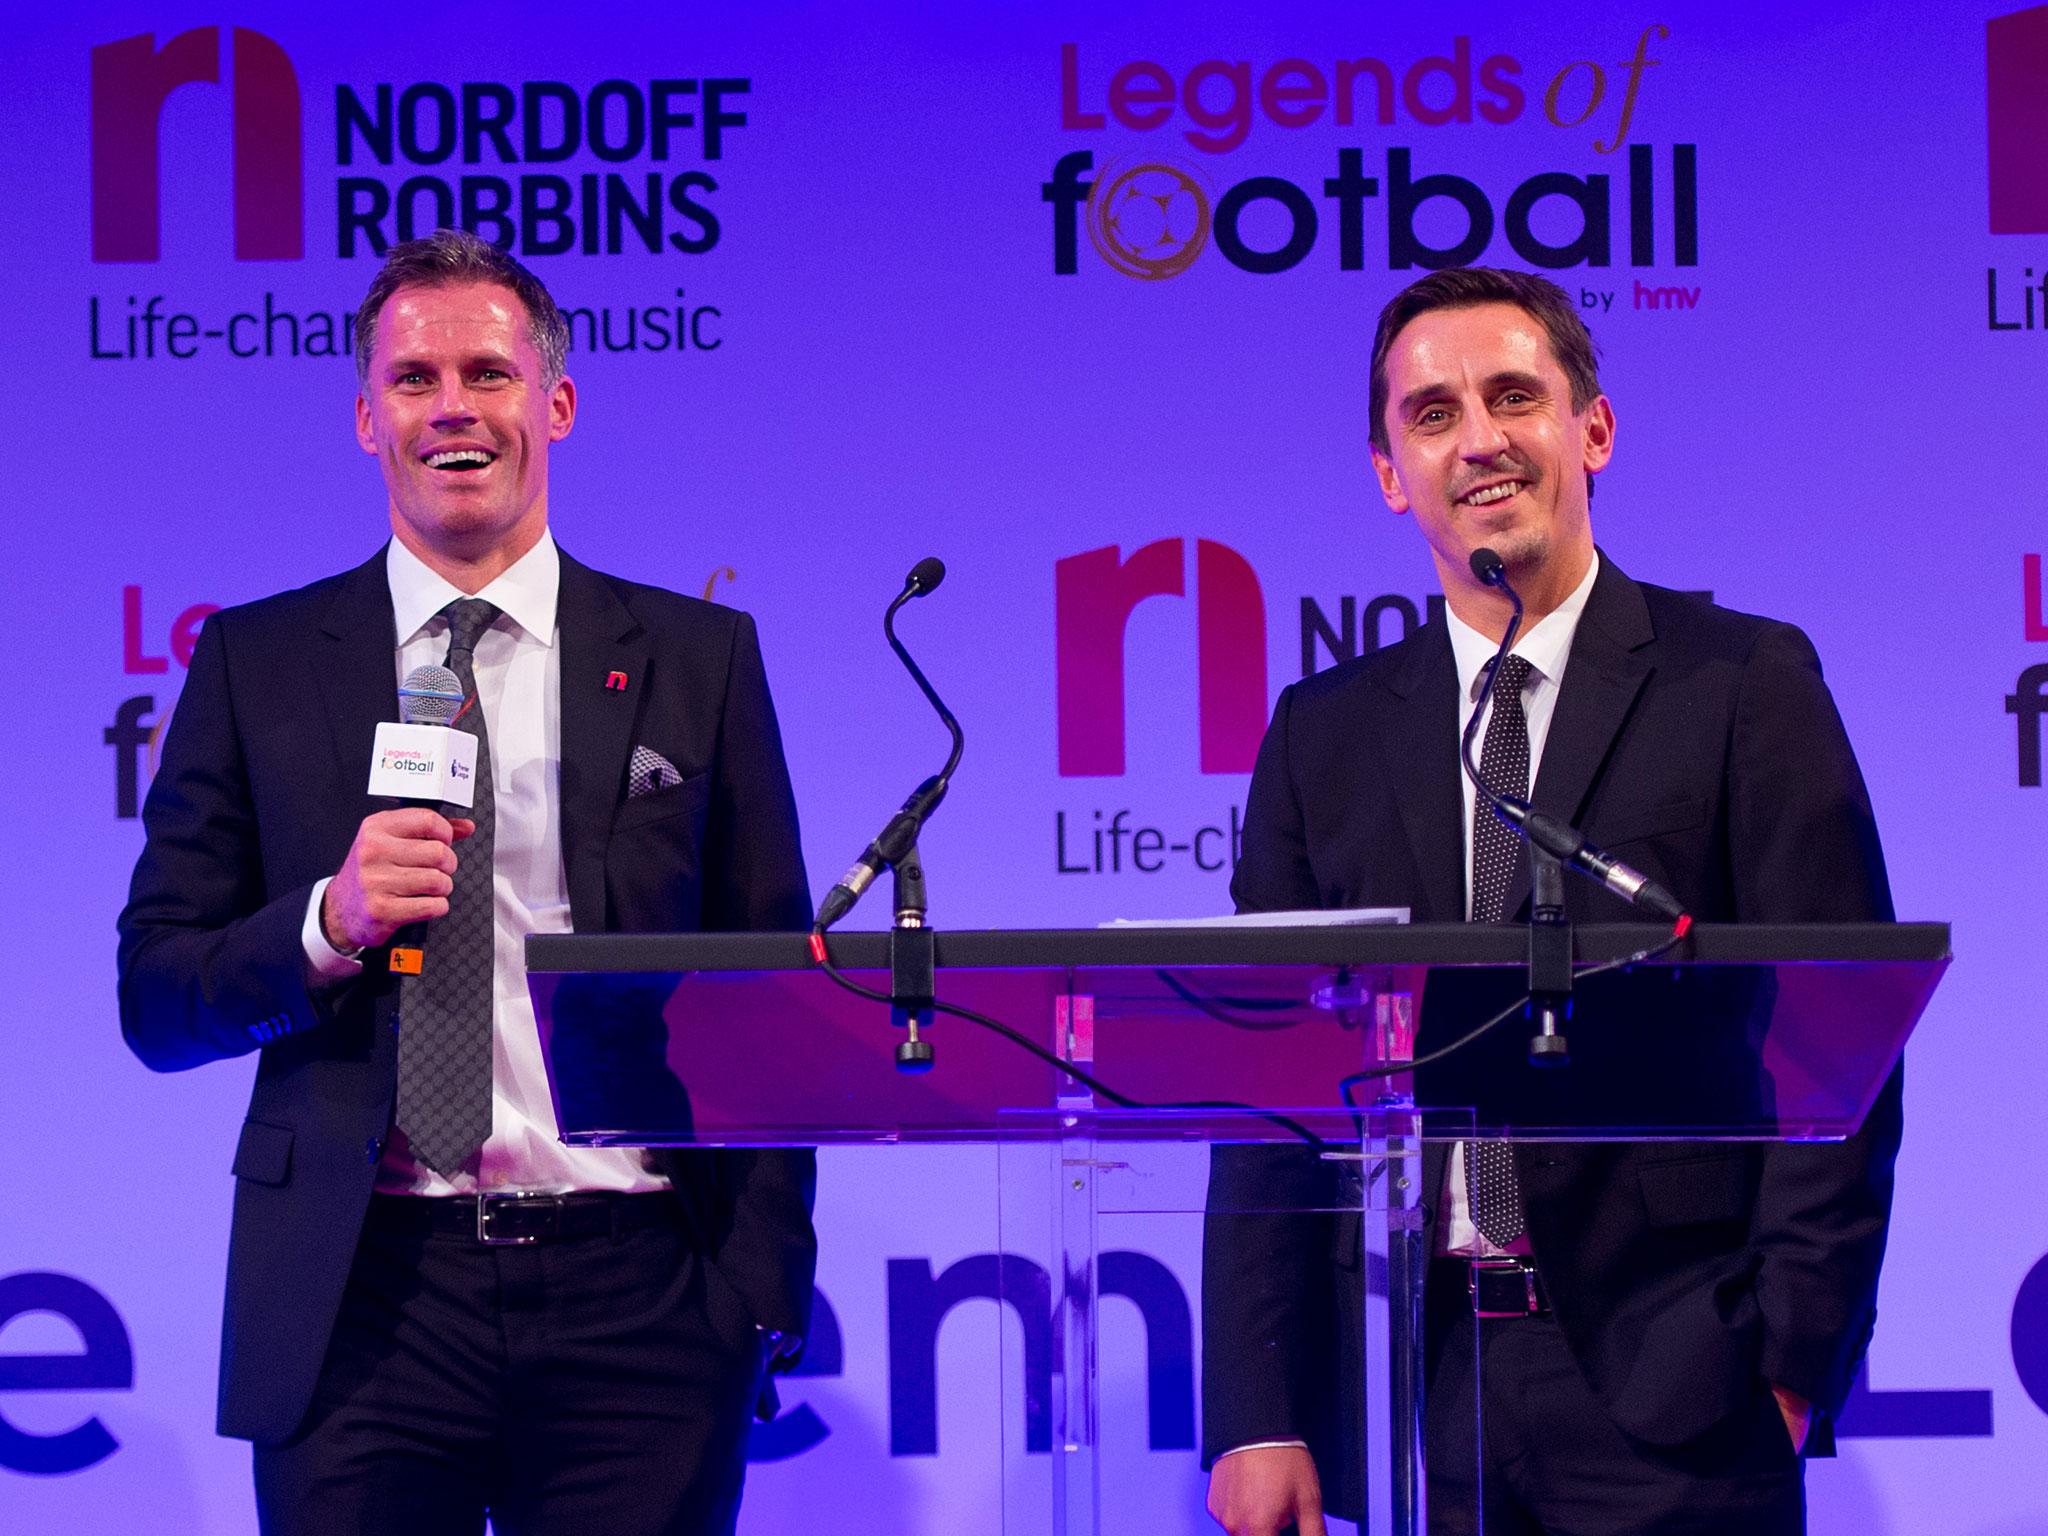 Jamie Carragher couldn't help but have a dig at his old pal Gary Neville